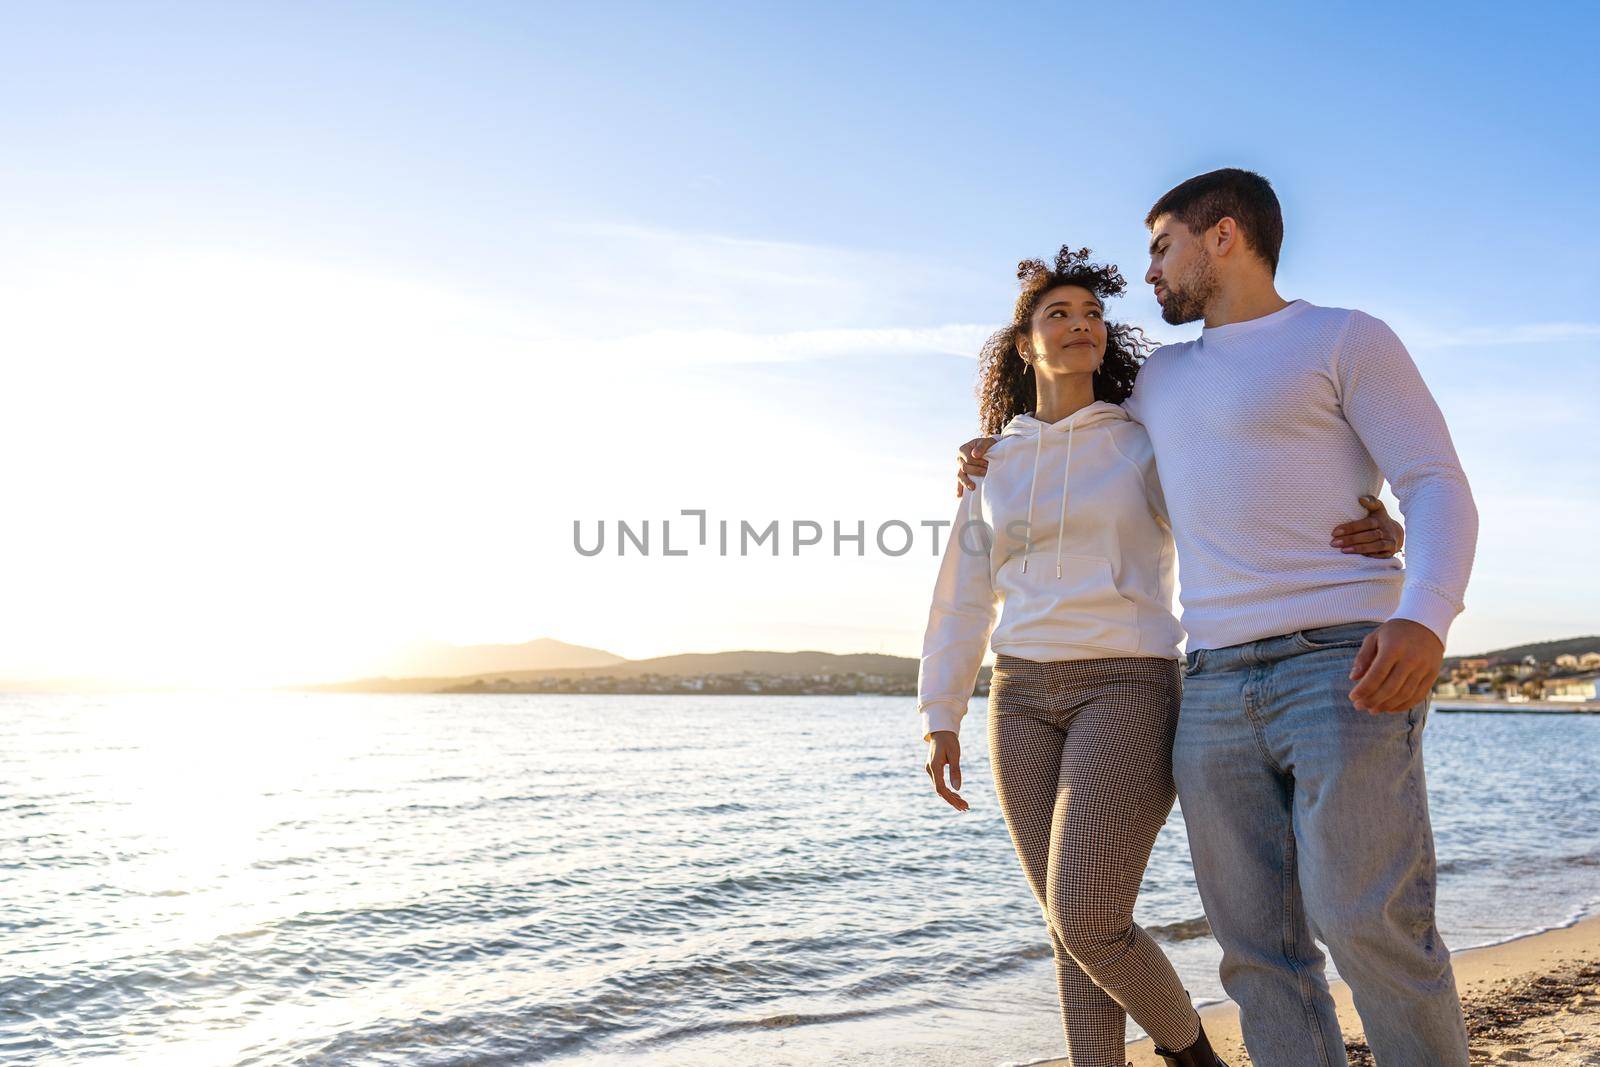 Multiracial couple of young millennials in love embracing each other while walking by the sea at sunset or sunrise looking into each other's eyes. Concept: affections has no boundaries of race or sex